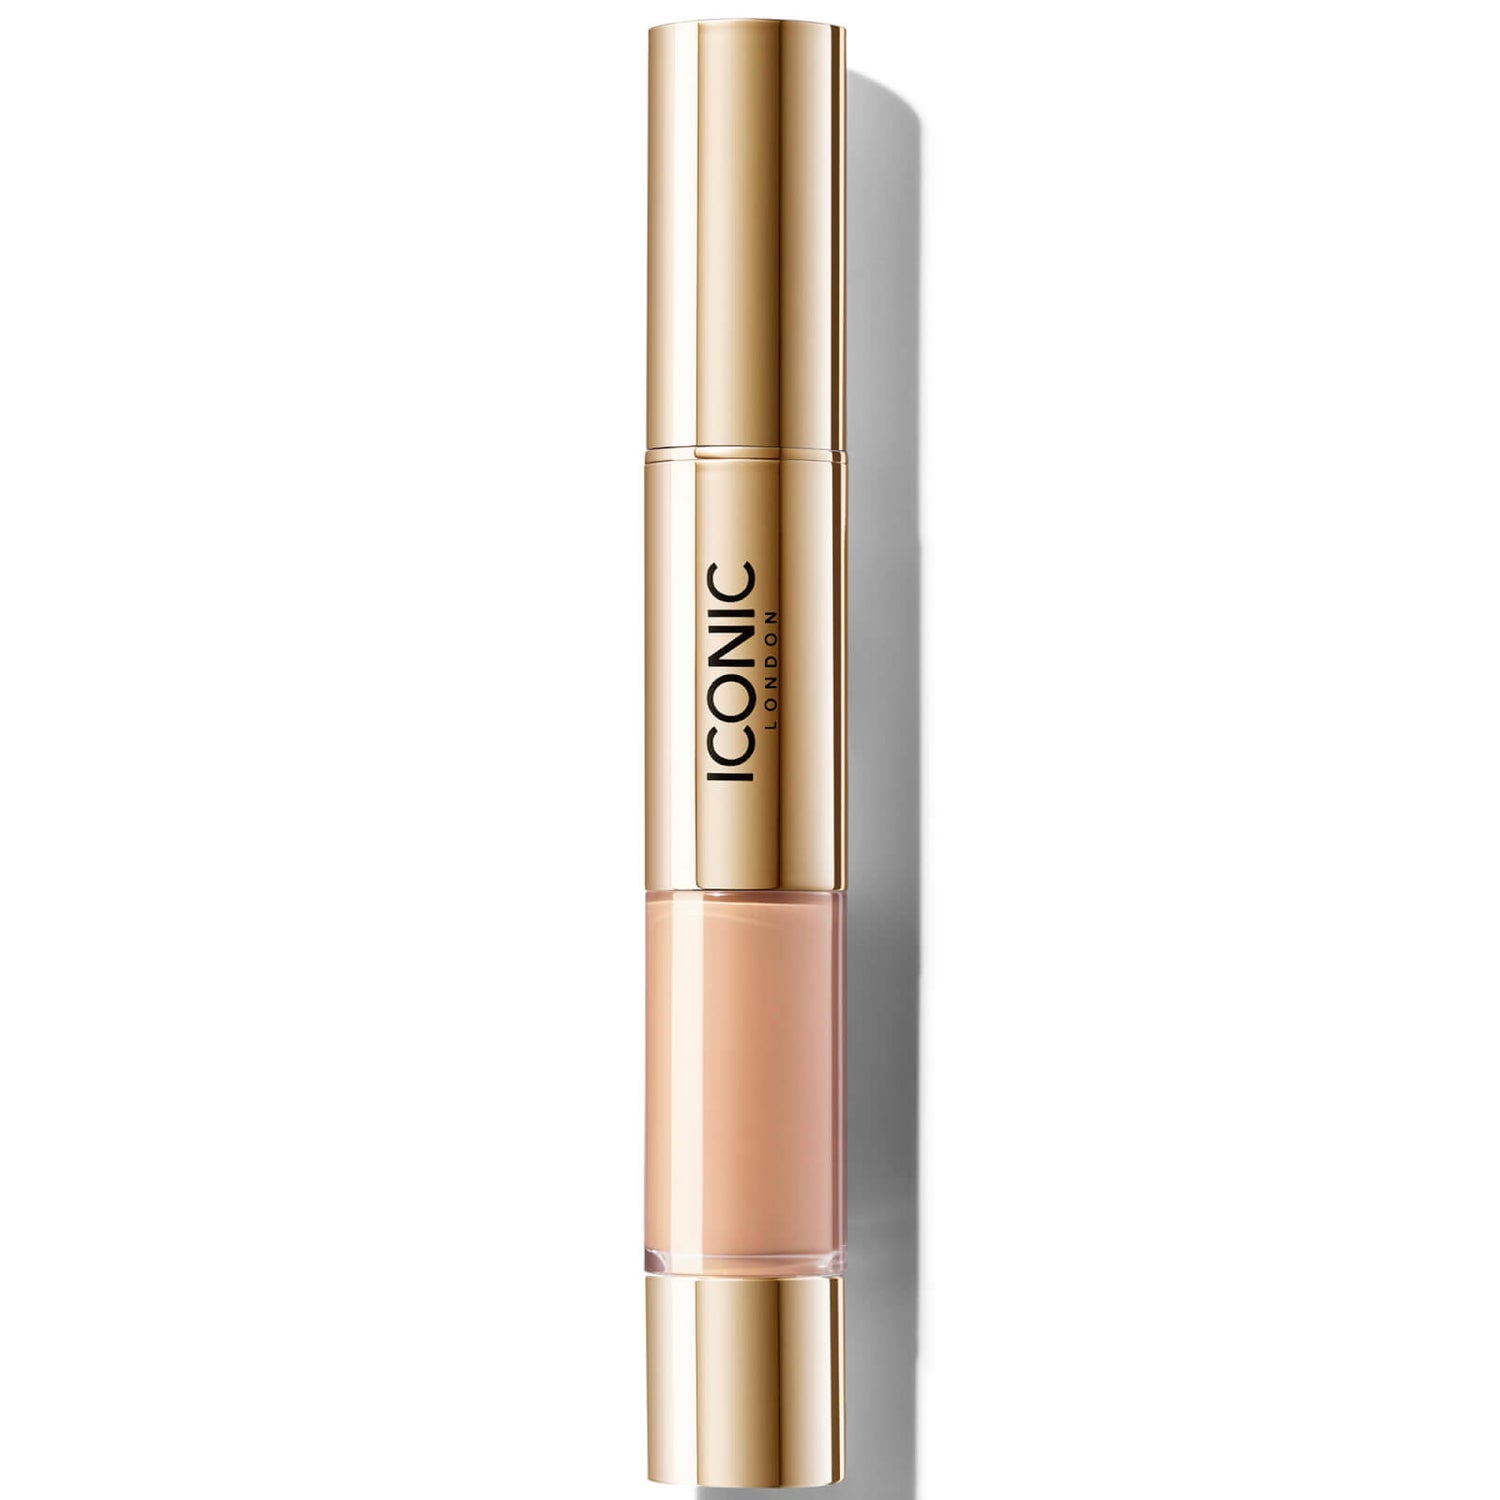 ICONIC London Radiant Concealer and Brightening Duo